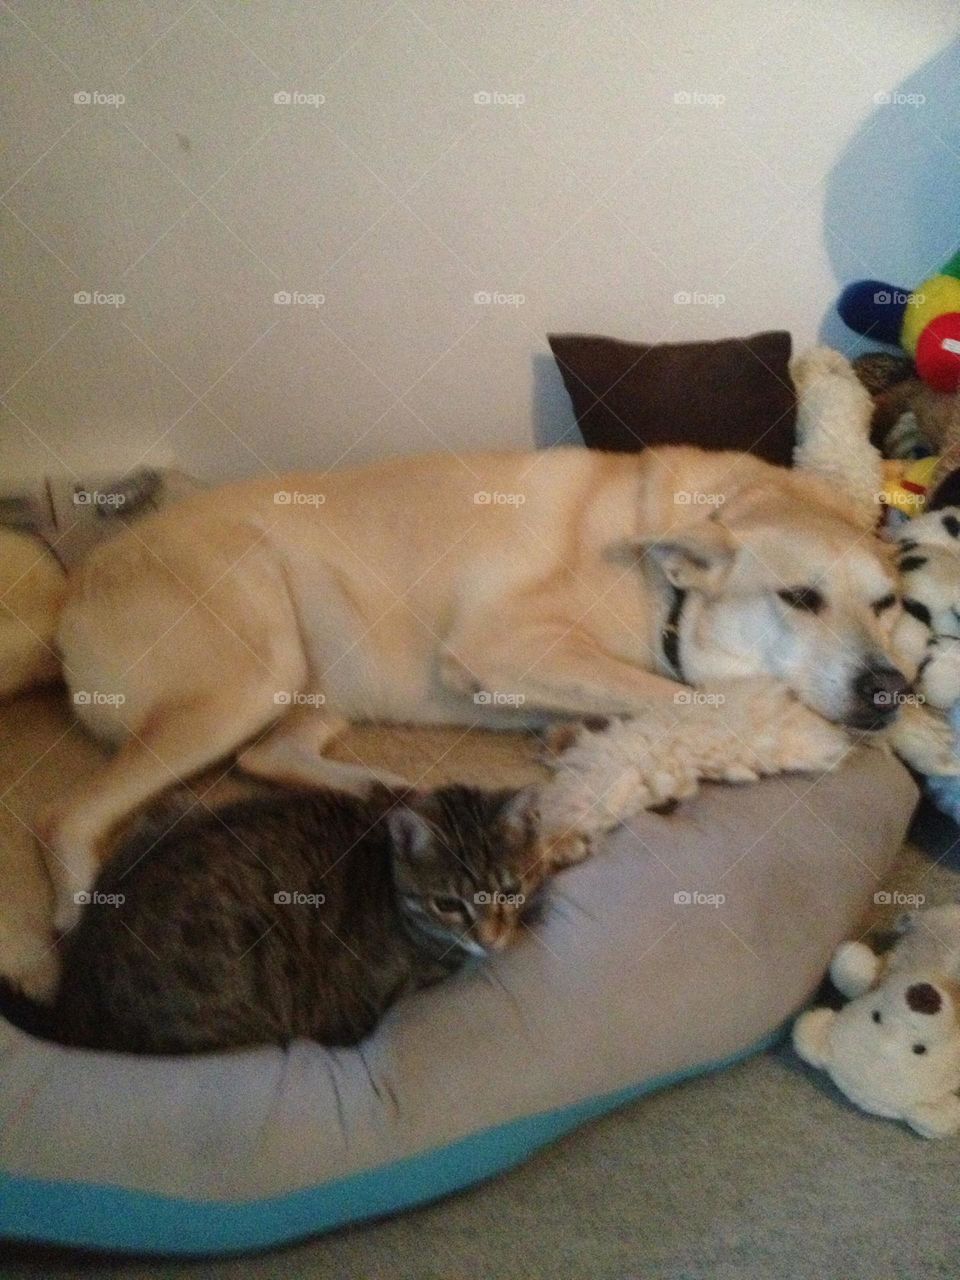 Cat sleeps in a dog bed with a dog